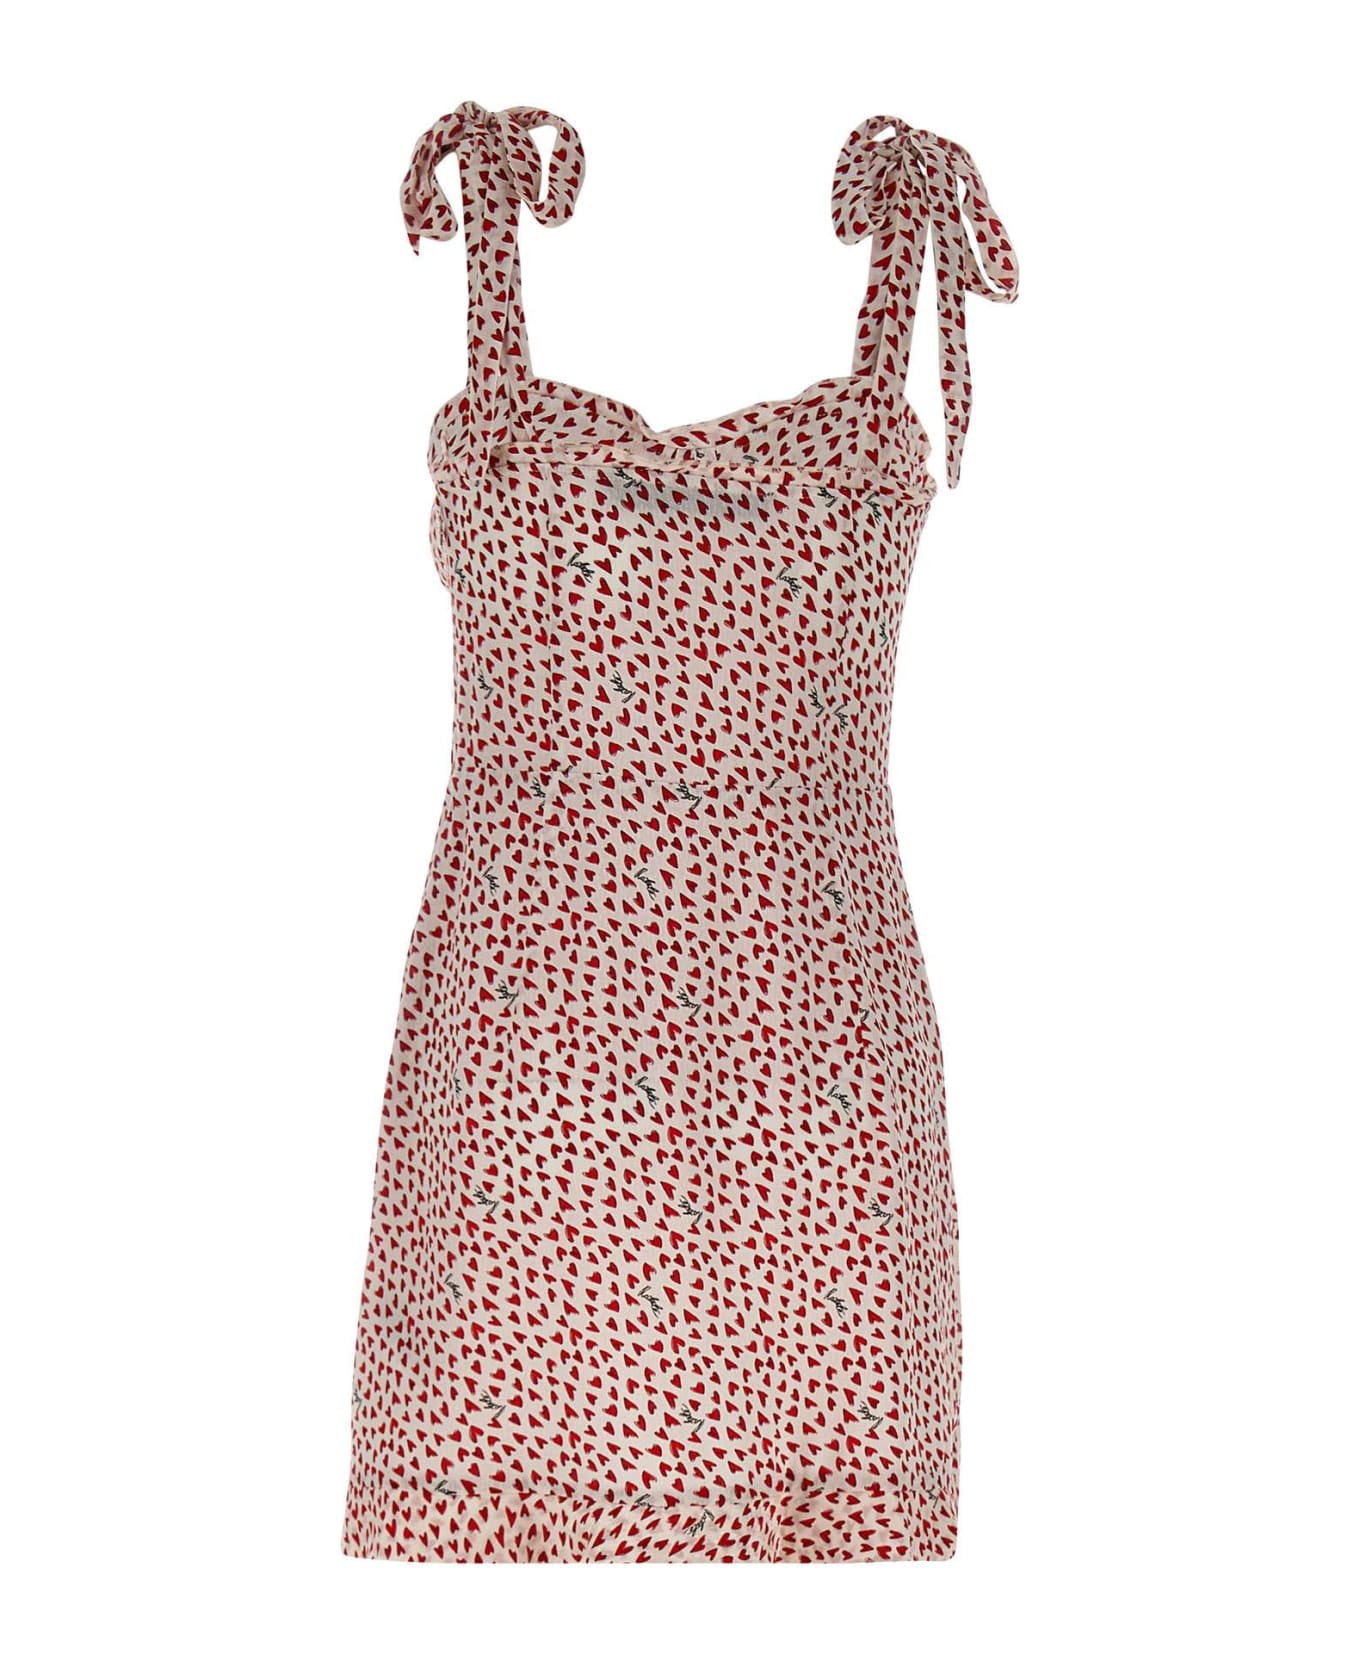 Rotate by Birger Christensen "printed Mini Ruffle" Crepe Dress - RED/white